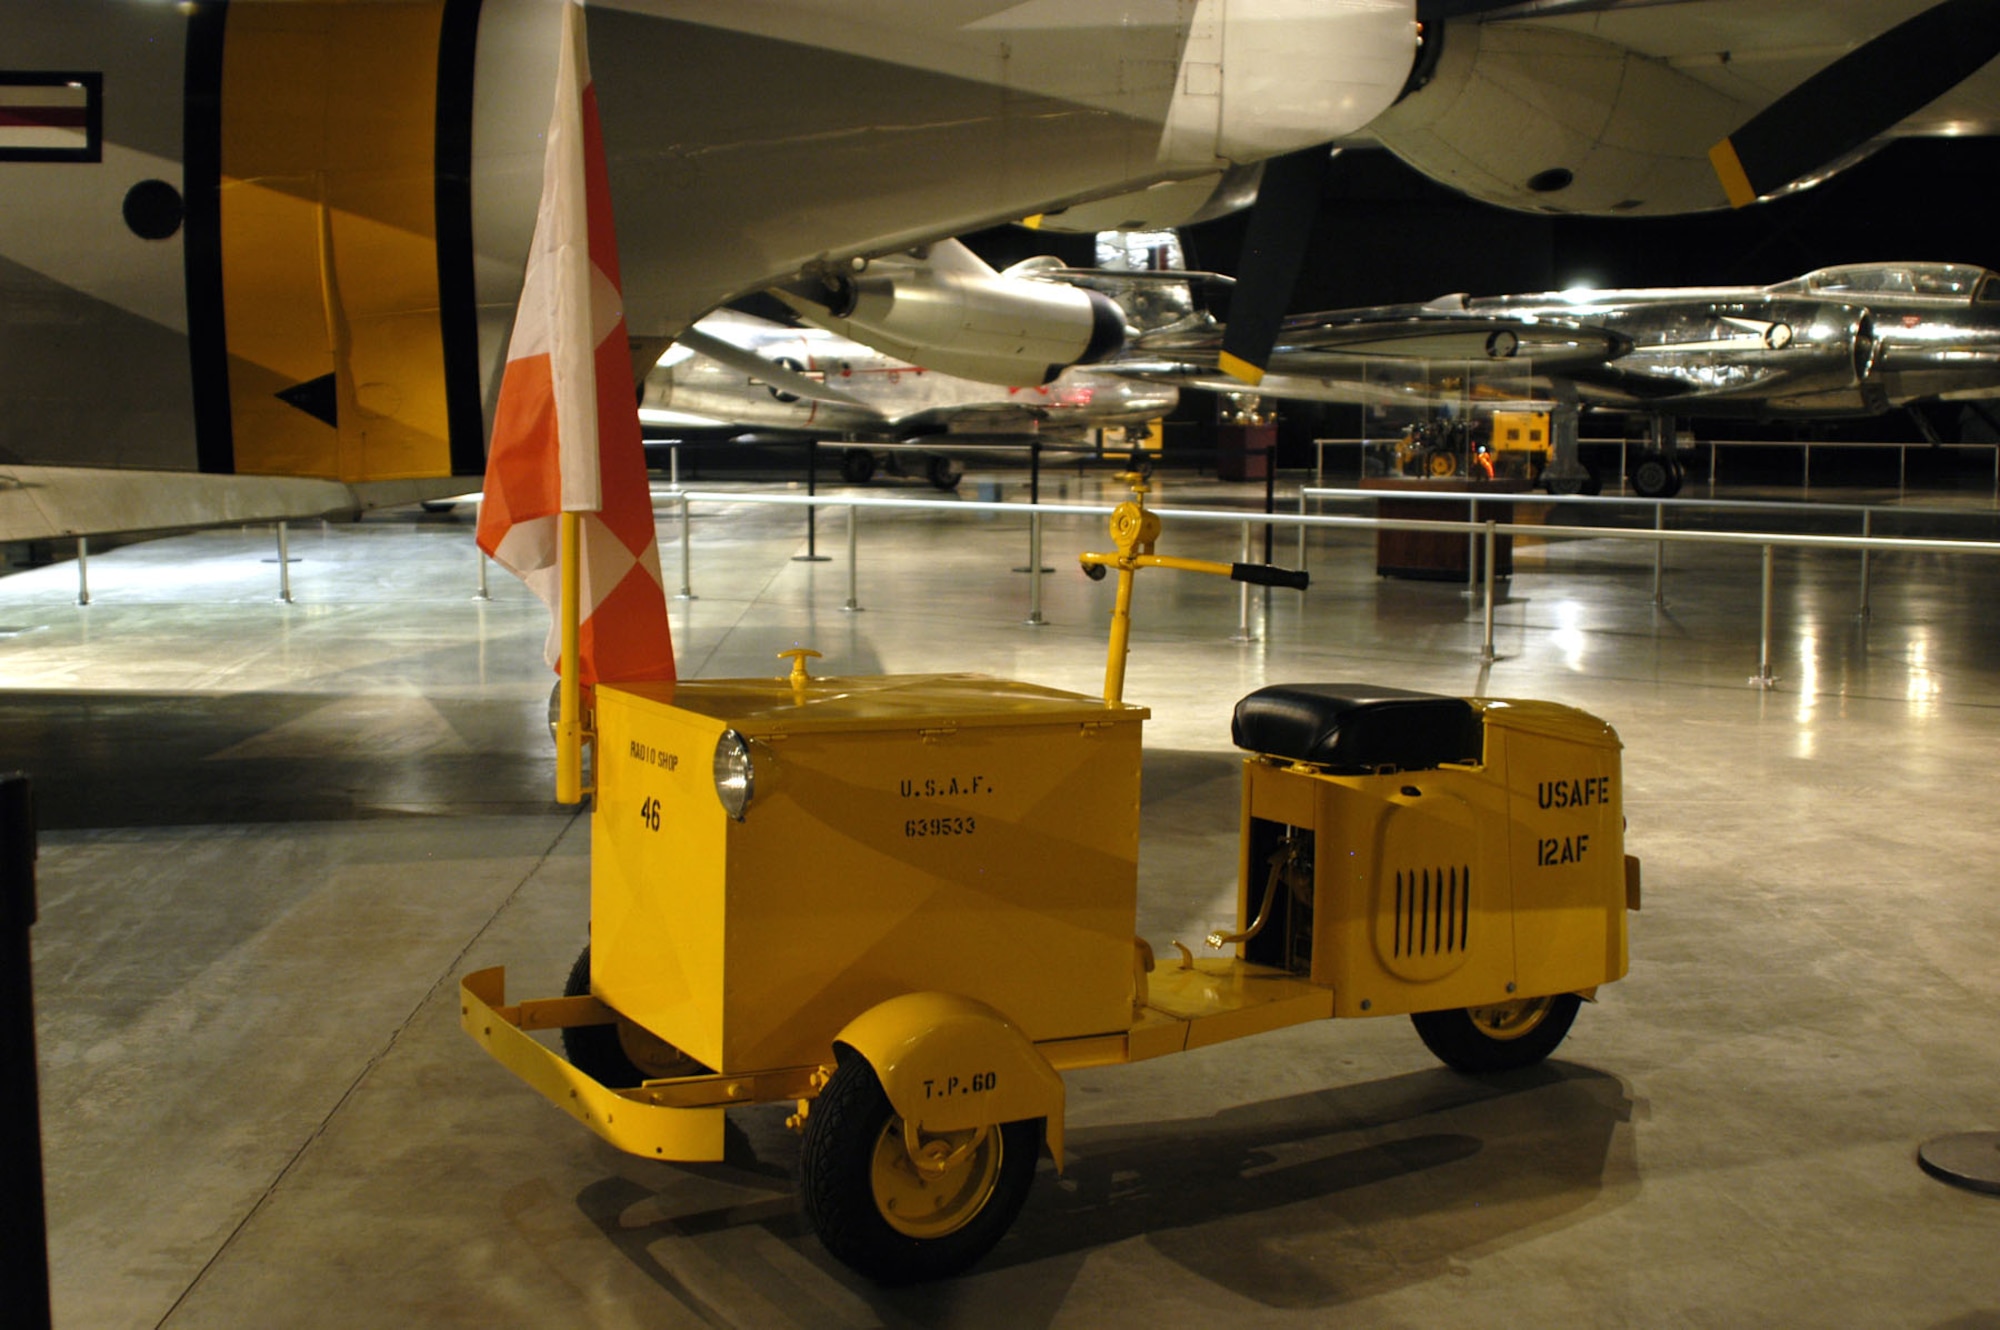 DAYTON, Ohio -- Cushman Model 39 Delivery Scooter on display in the Cold War Gallery at the National Museum of the United States Air Force. (U.S. Air Force photo)